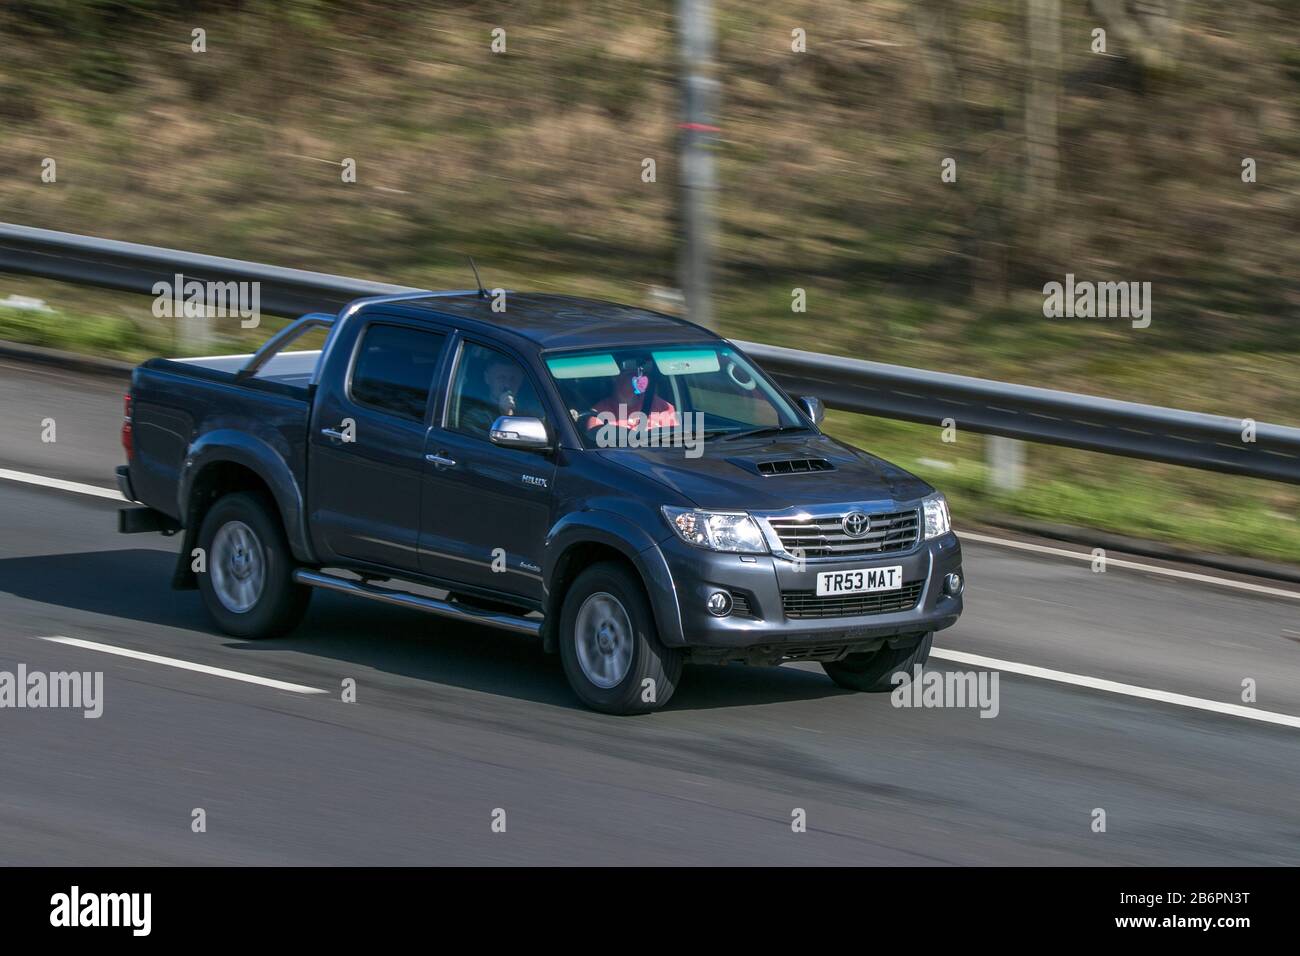 2014 Toyota Hilux Invincible D-4D 4X4 dcb A Grey LCV Diesel driving on the M6 motorway near Preston in Lancashire, UK Stock Photo